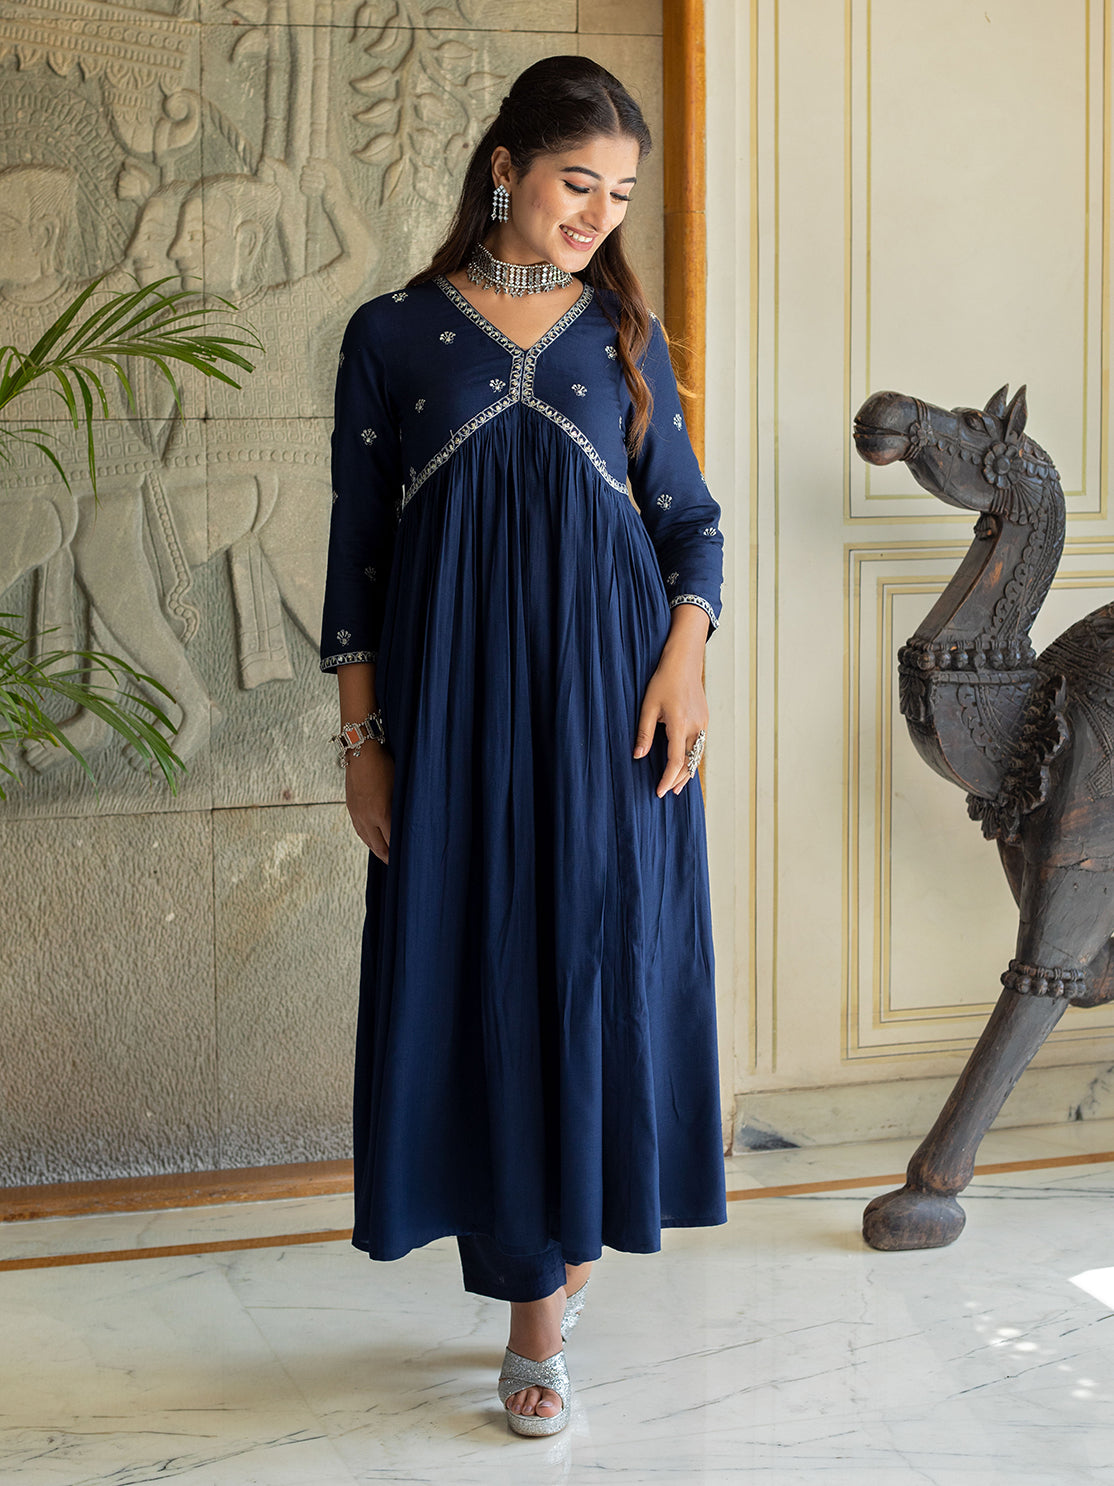 embrace-elegance-in-our-blue-embroidered-dress-a-fusion-of-style-and-grace-intricate-embroidery-meets-chic-design-for-a-timeless-look